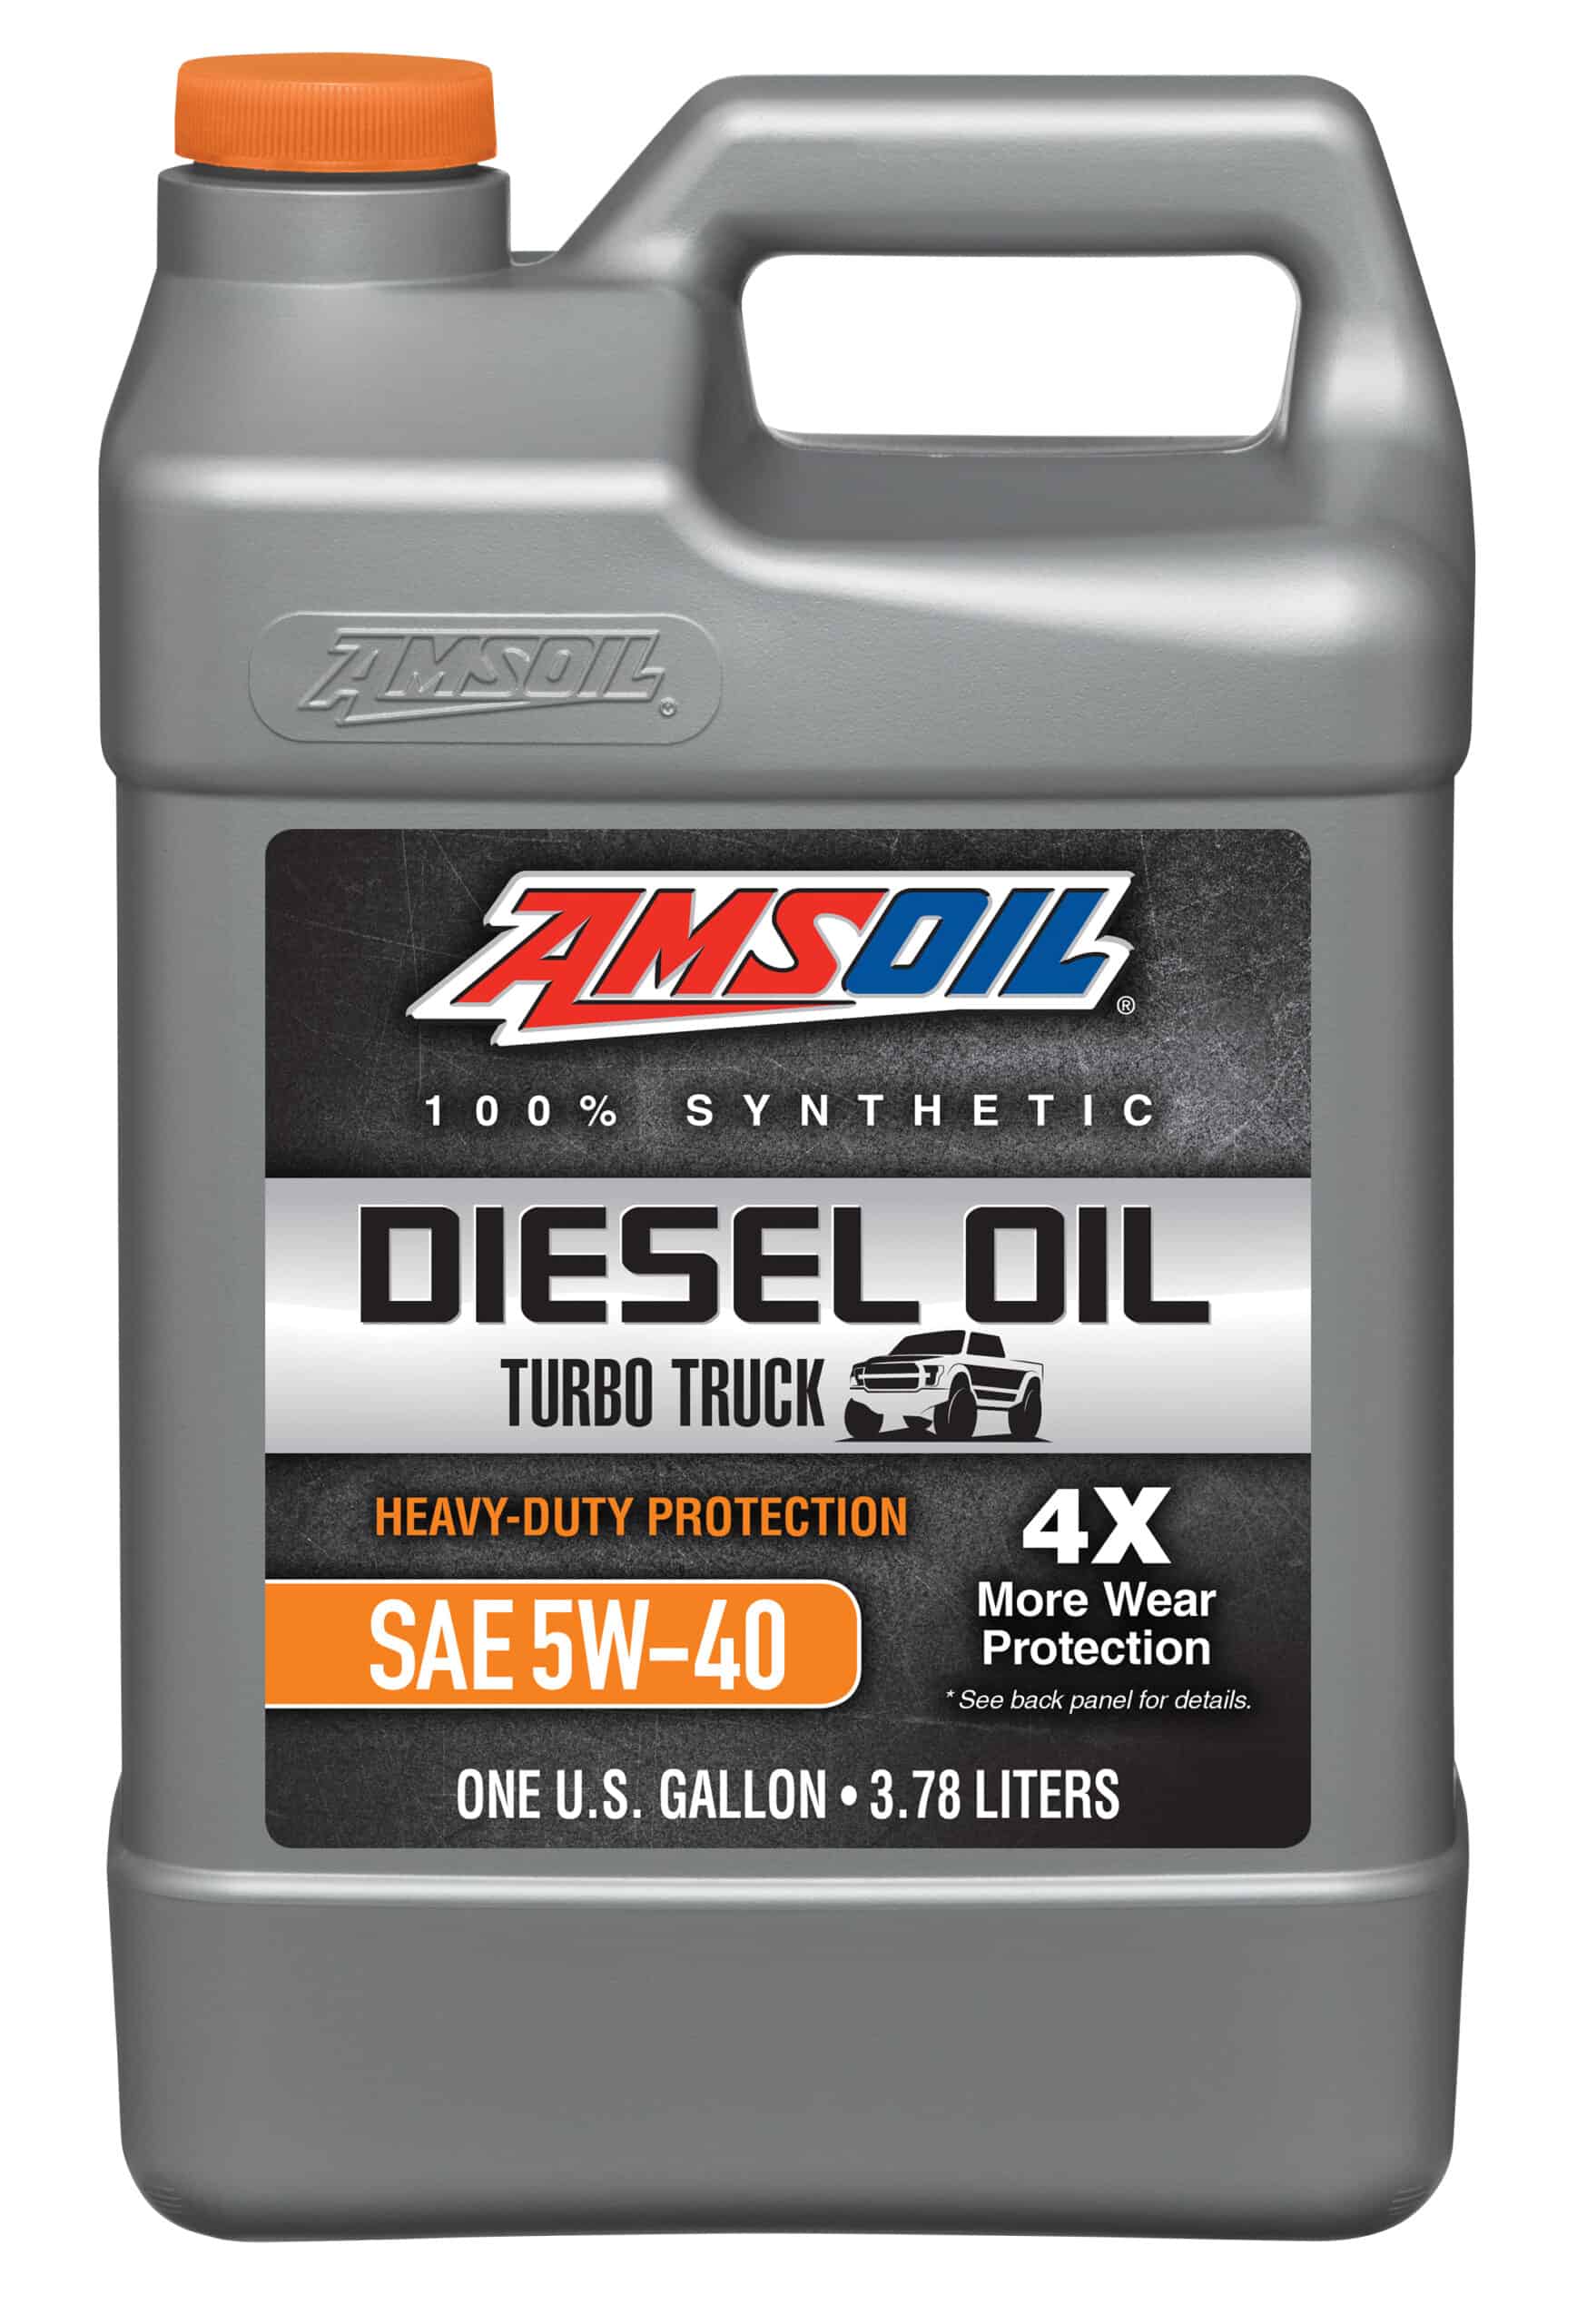 A gallon of AMSOIL Heavy-Duty Synthetic Diesel Oil, which provides excellent protection for customers seeking an upgrade over competing synthetic diesel oils.